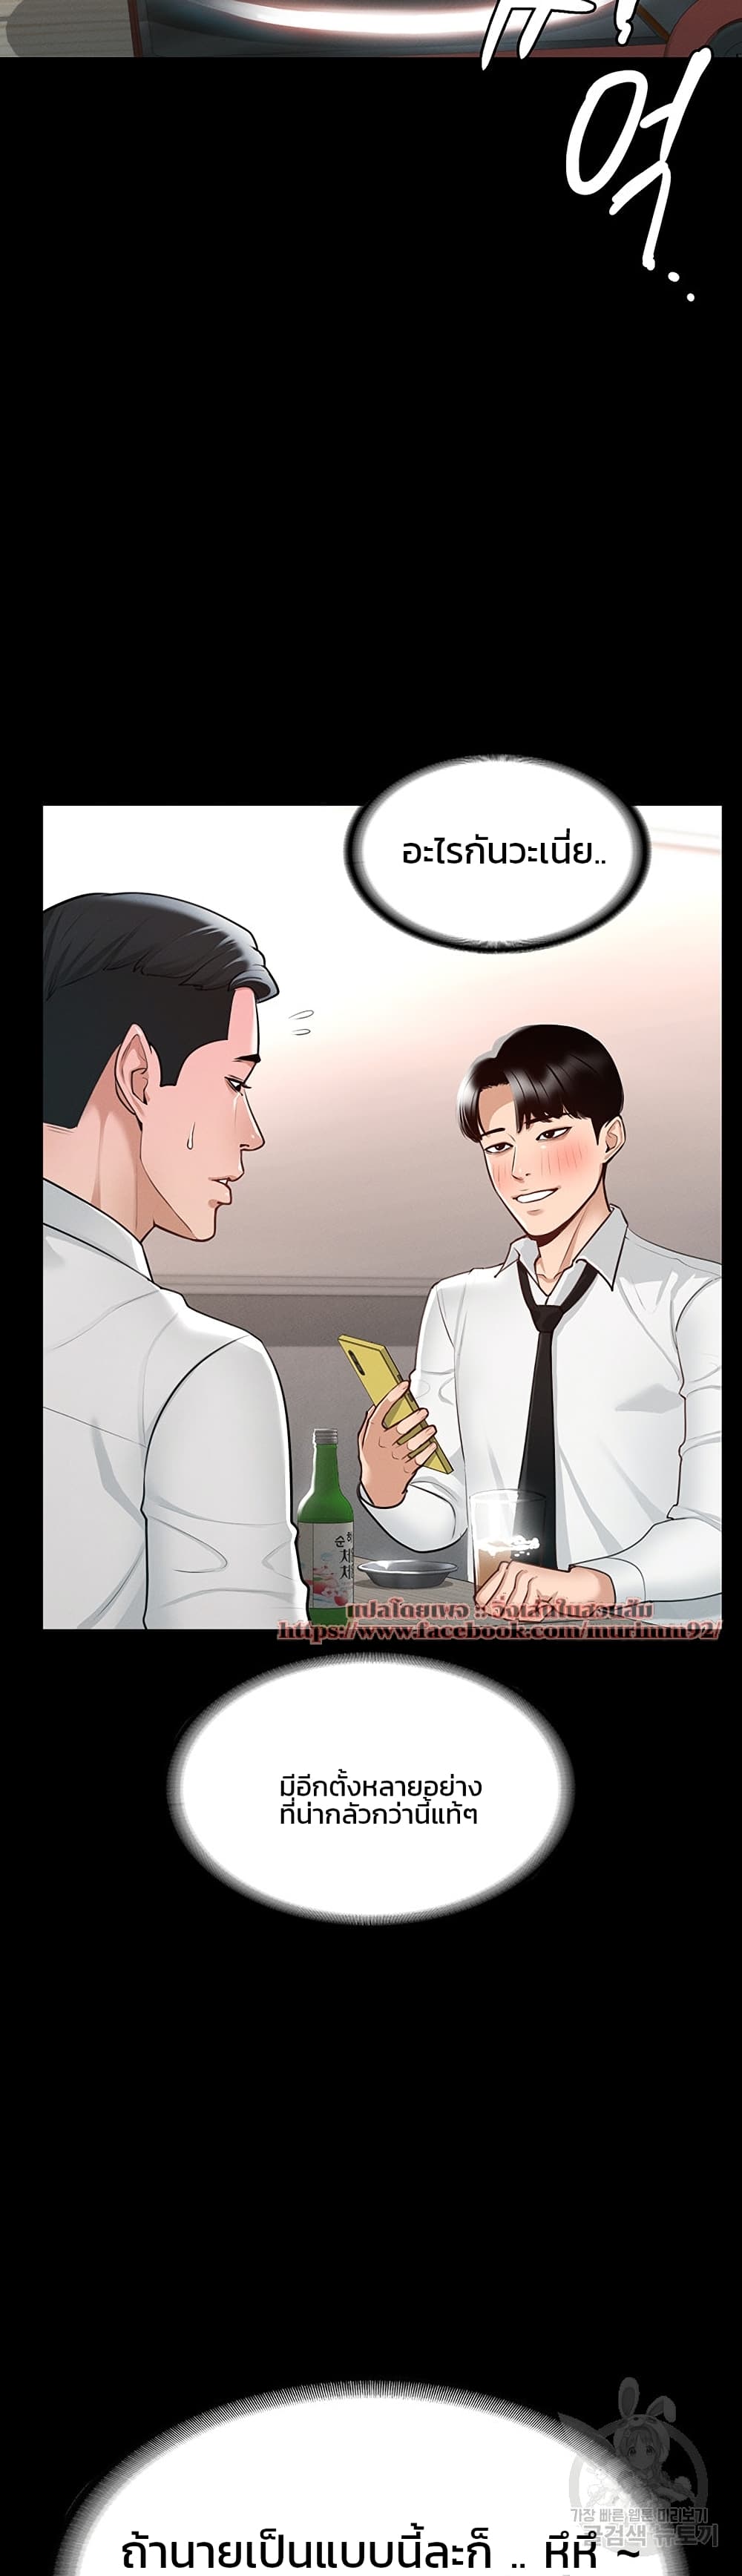 Workplace Manager Privileges ตอนที่ 2 ภาพ 13